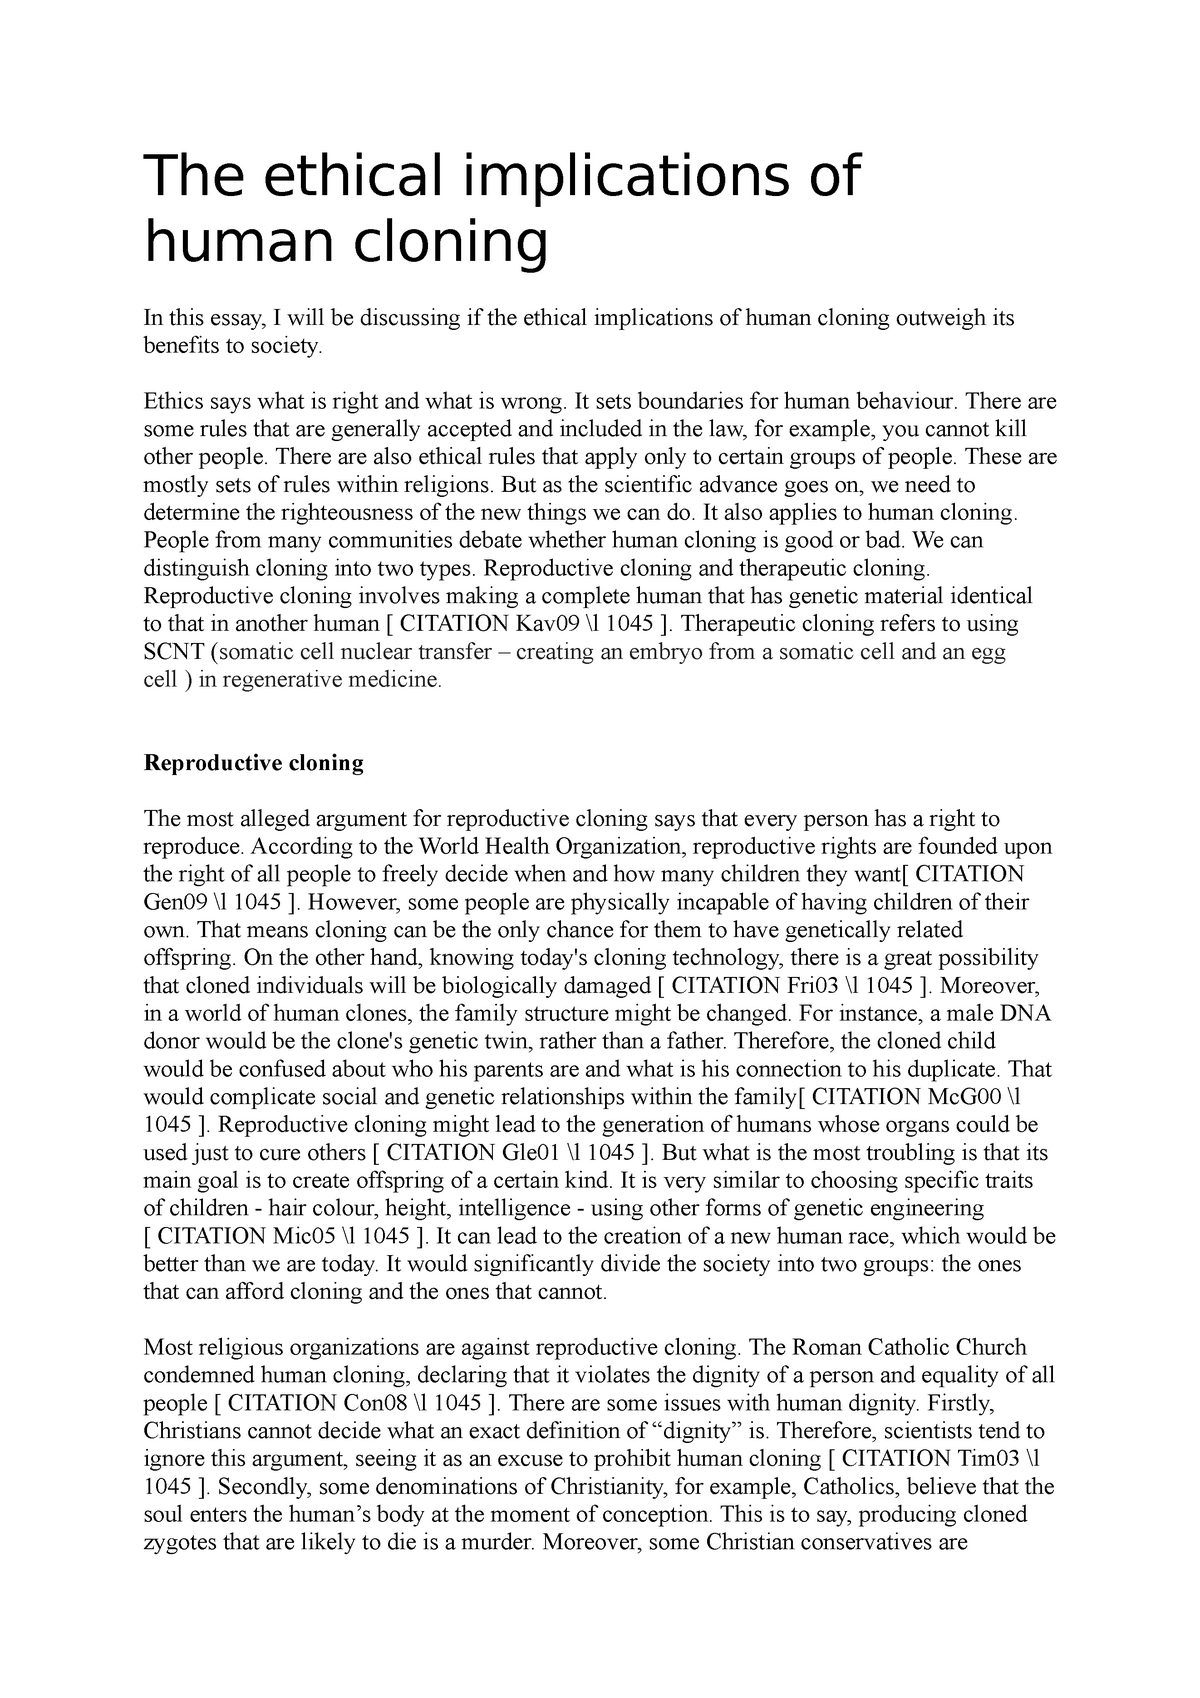 human cloning unethical essay